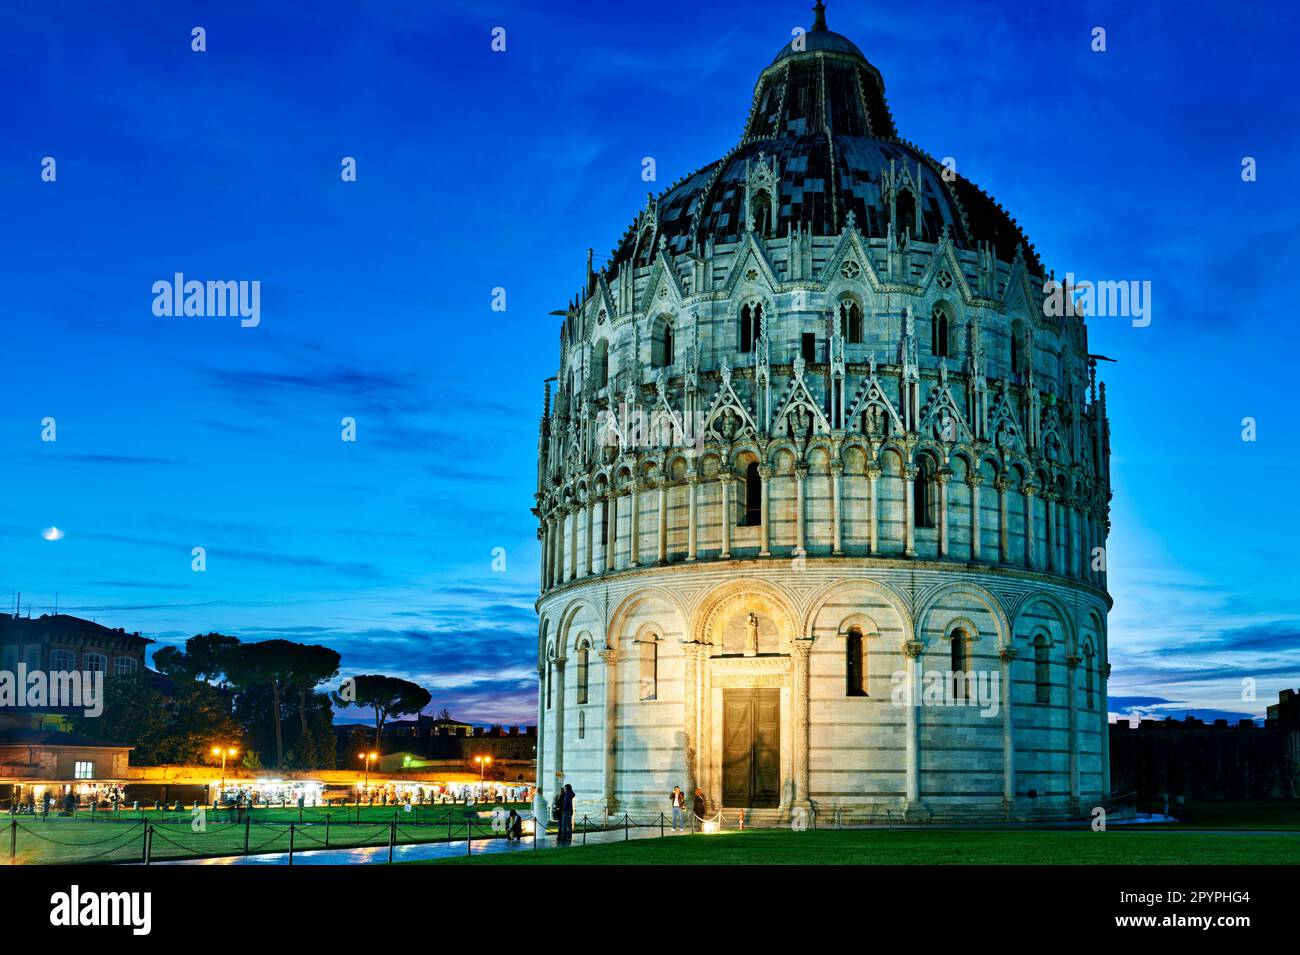 Pisa Tuscany Italy. Piazza dei Miracoli (Square of Miracles). The Baptistery at sunset Stock Photo